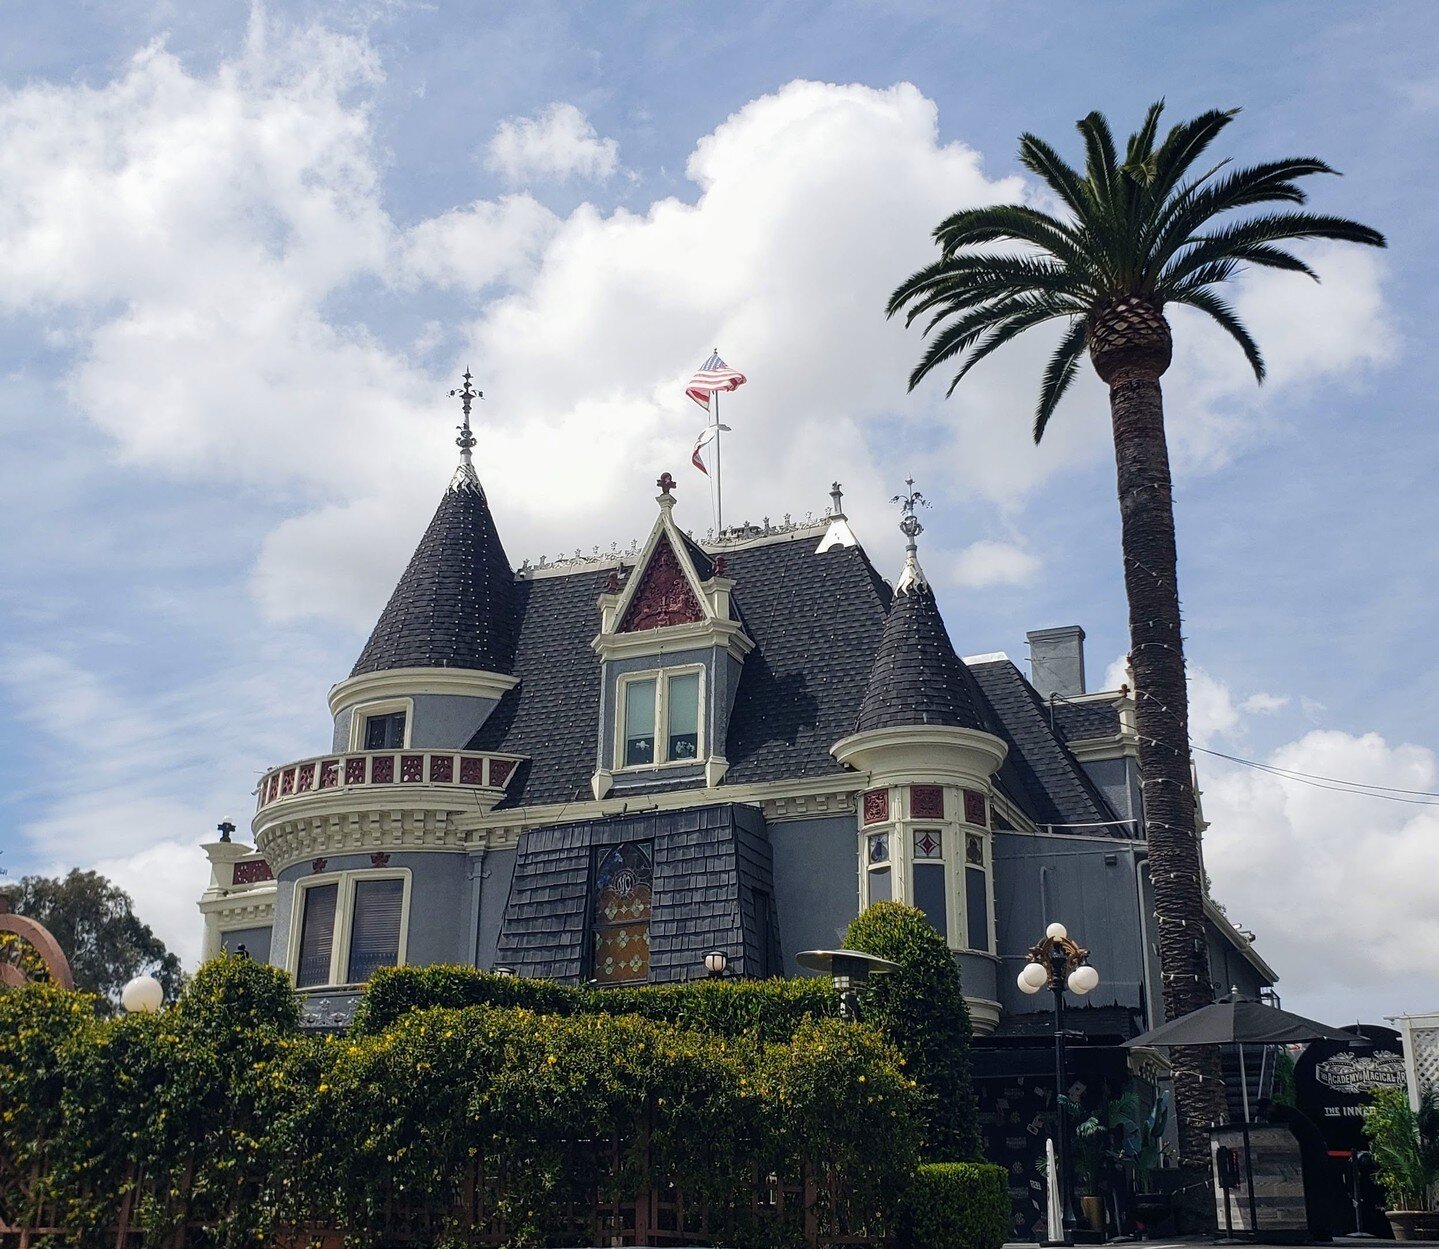 If you have ever been to the Magic Castle in Hollywood, you might notice how clean the windows are :)